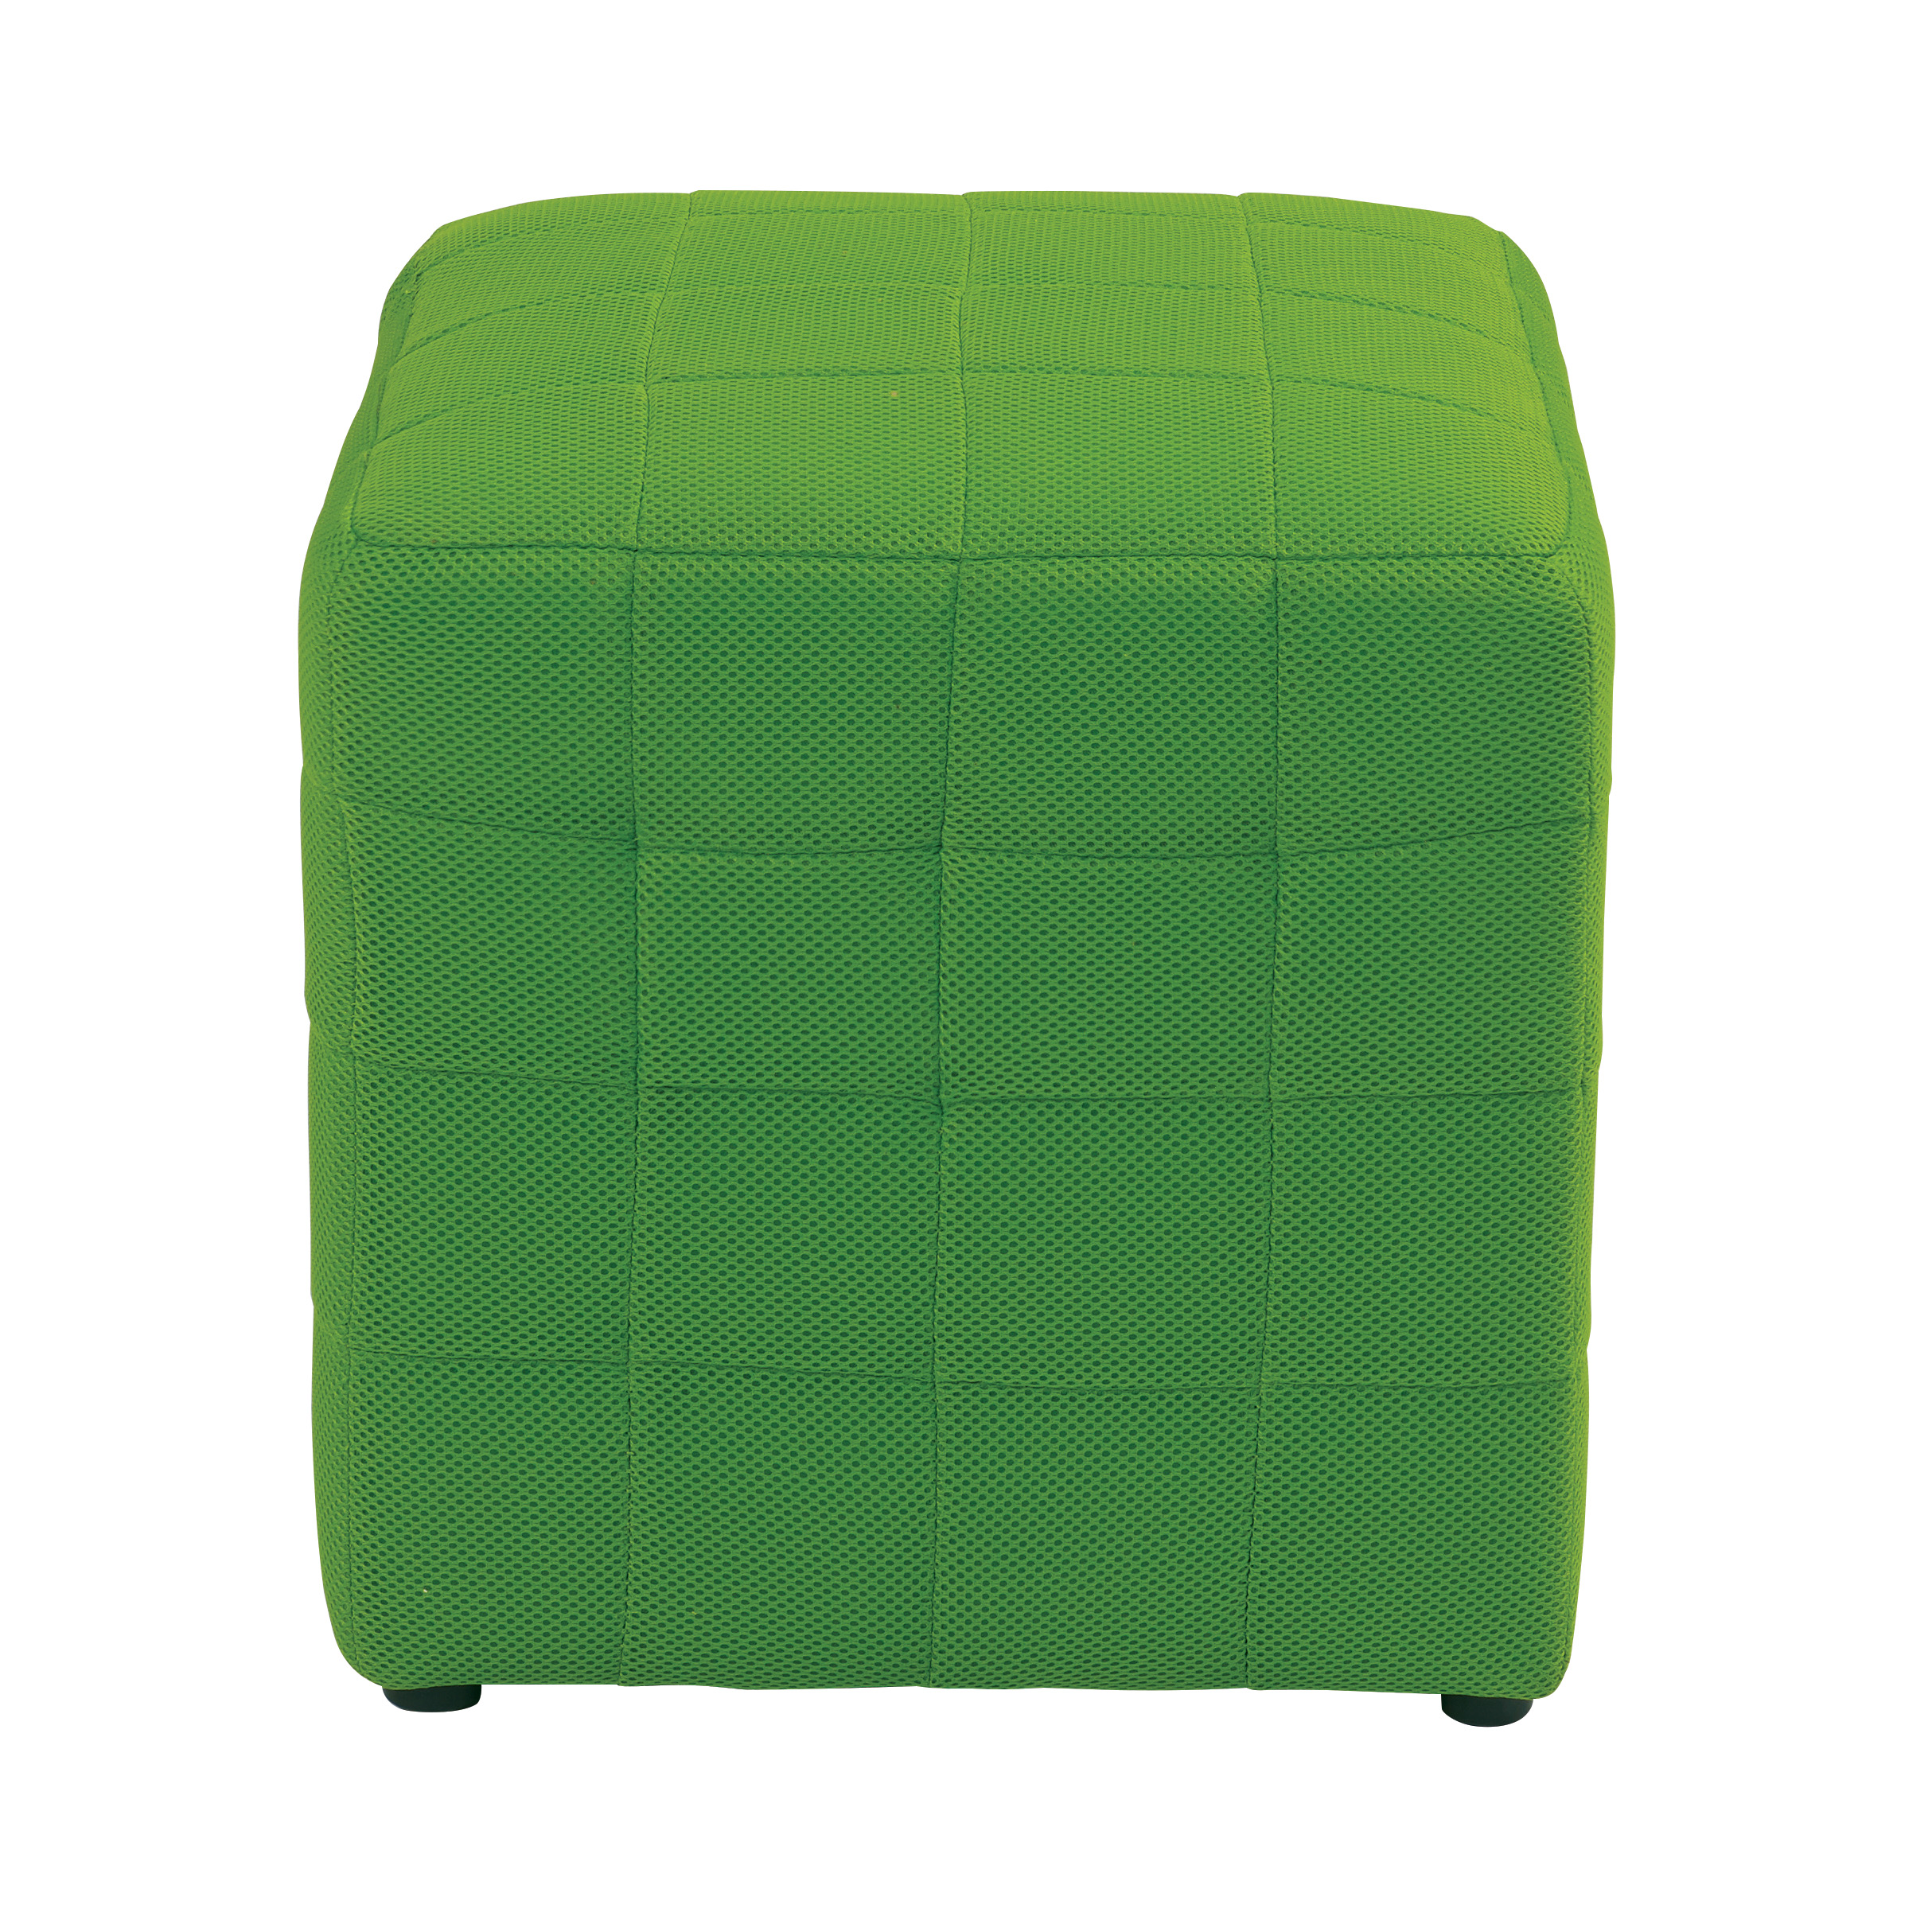 OSP Home Furnishings Detour 15" Green Fabric Cube - image 3 of 10